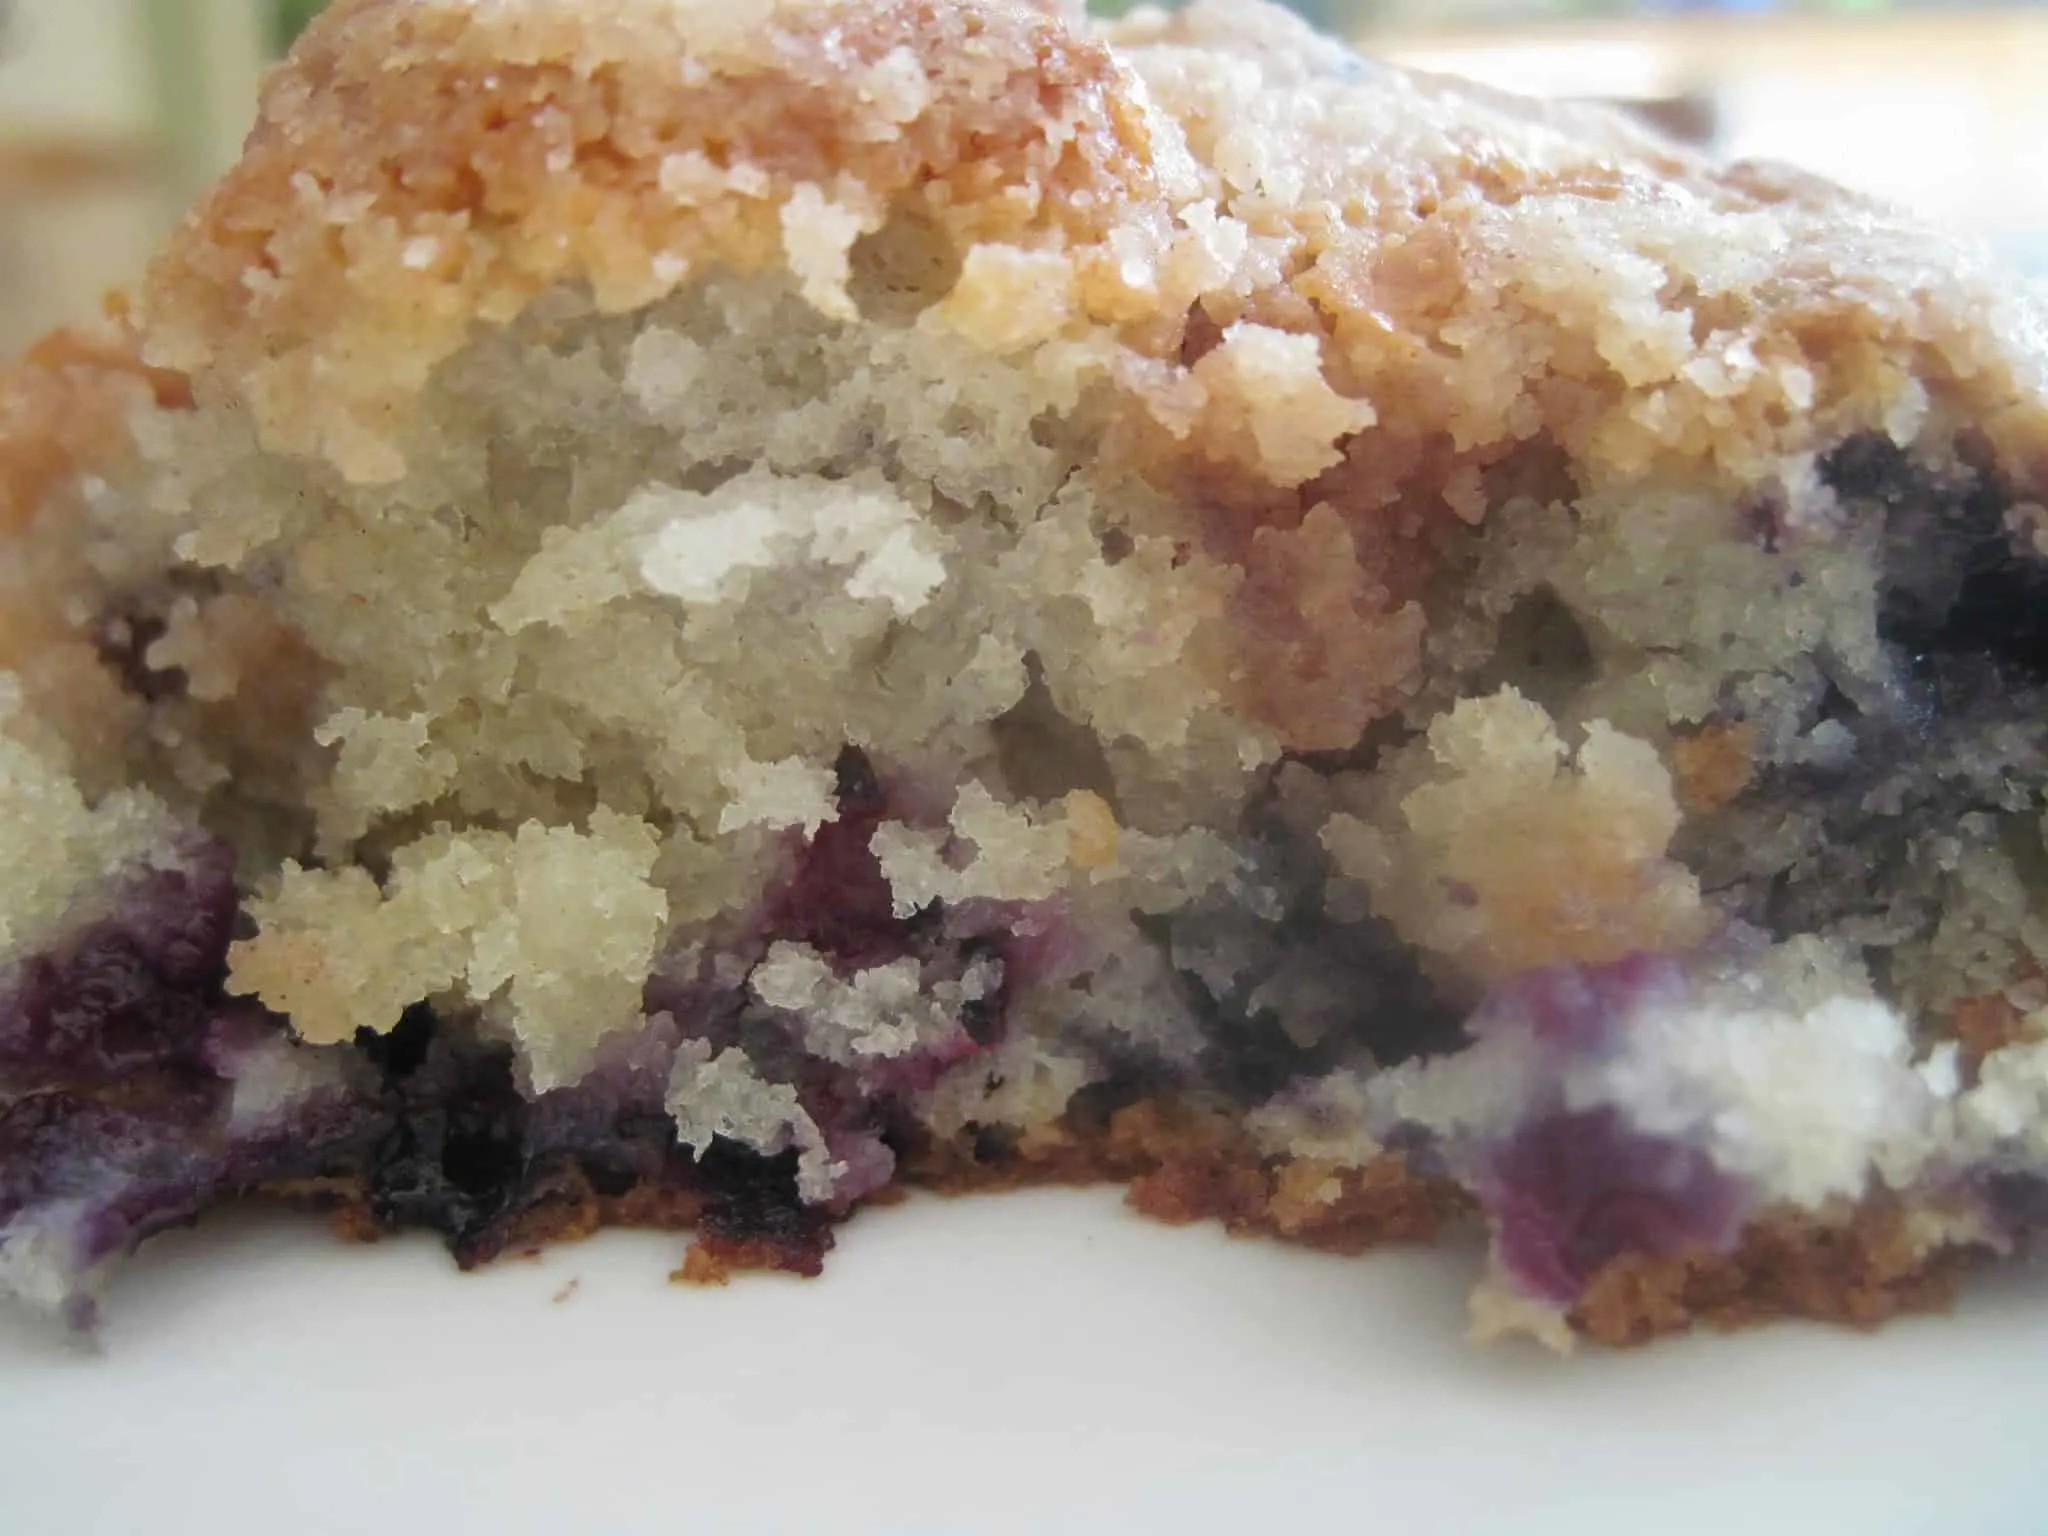 A yummy moist blueberry coffee cake that does not include coffee, it’s supposed to be eaten alongside a cup of coffee. via @Mooreorlesscook